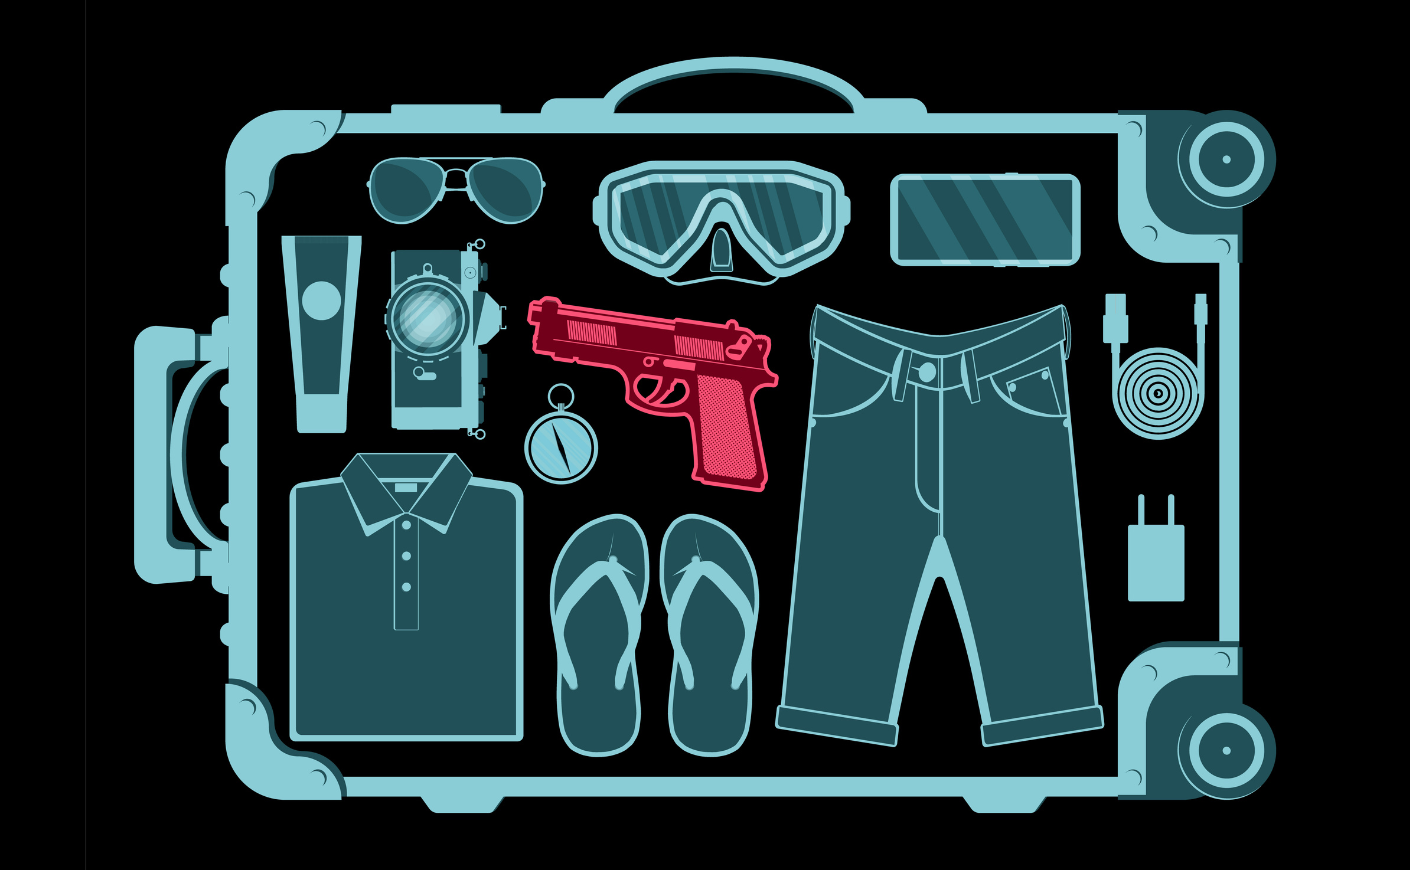 Illustration of a piece of luggage being x-rayed, with a gun inside